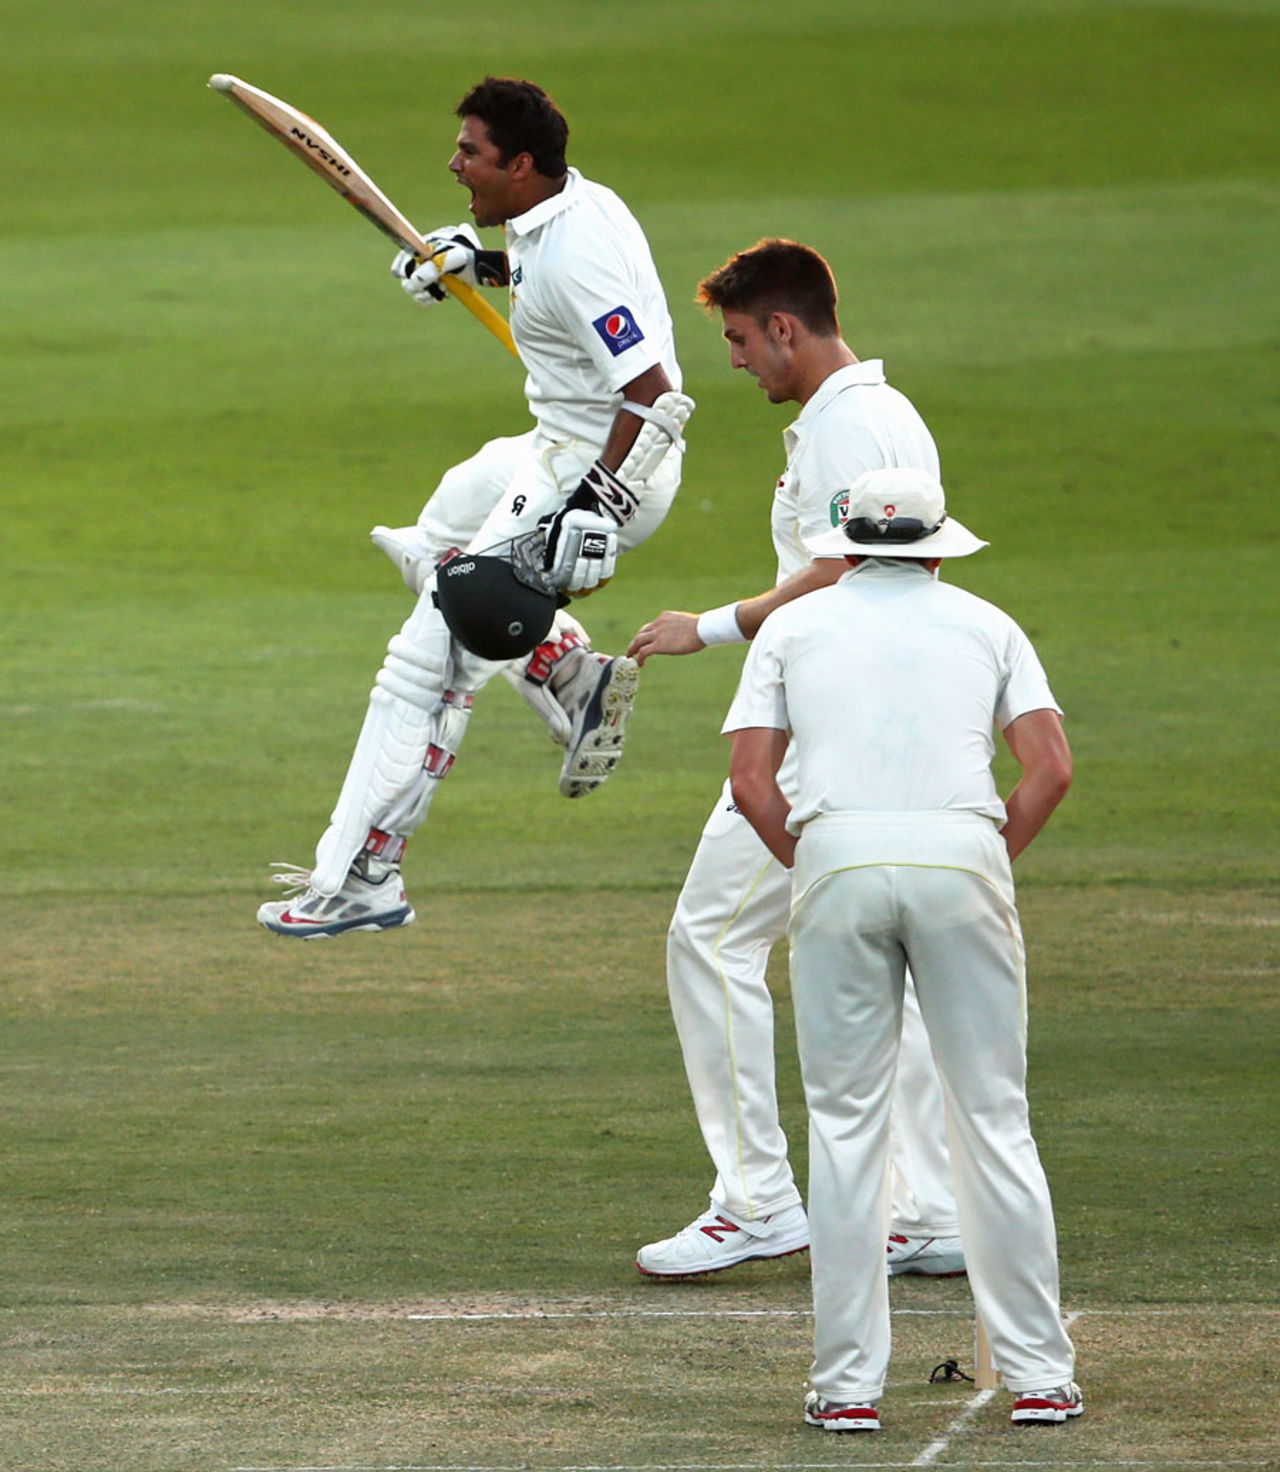 Azhar Ali leaps with joy after reaching his sixth Test hundred, Pakistan v Australia, 2nd Test, Abu Dhabi, 1st day, October 30, 2014